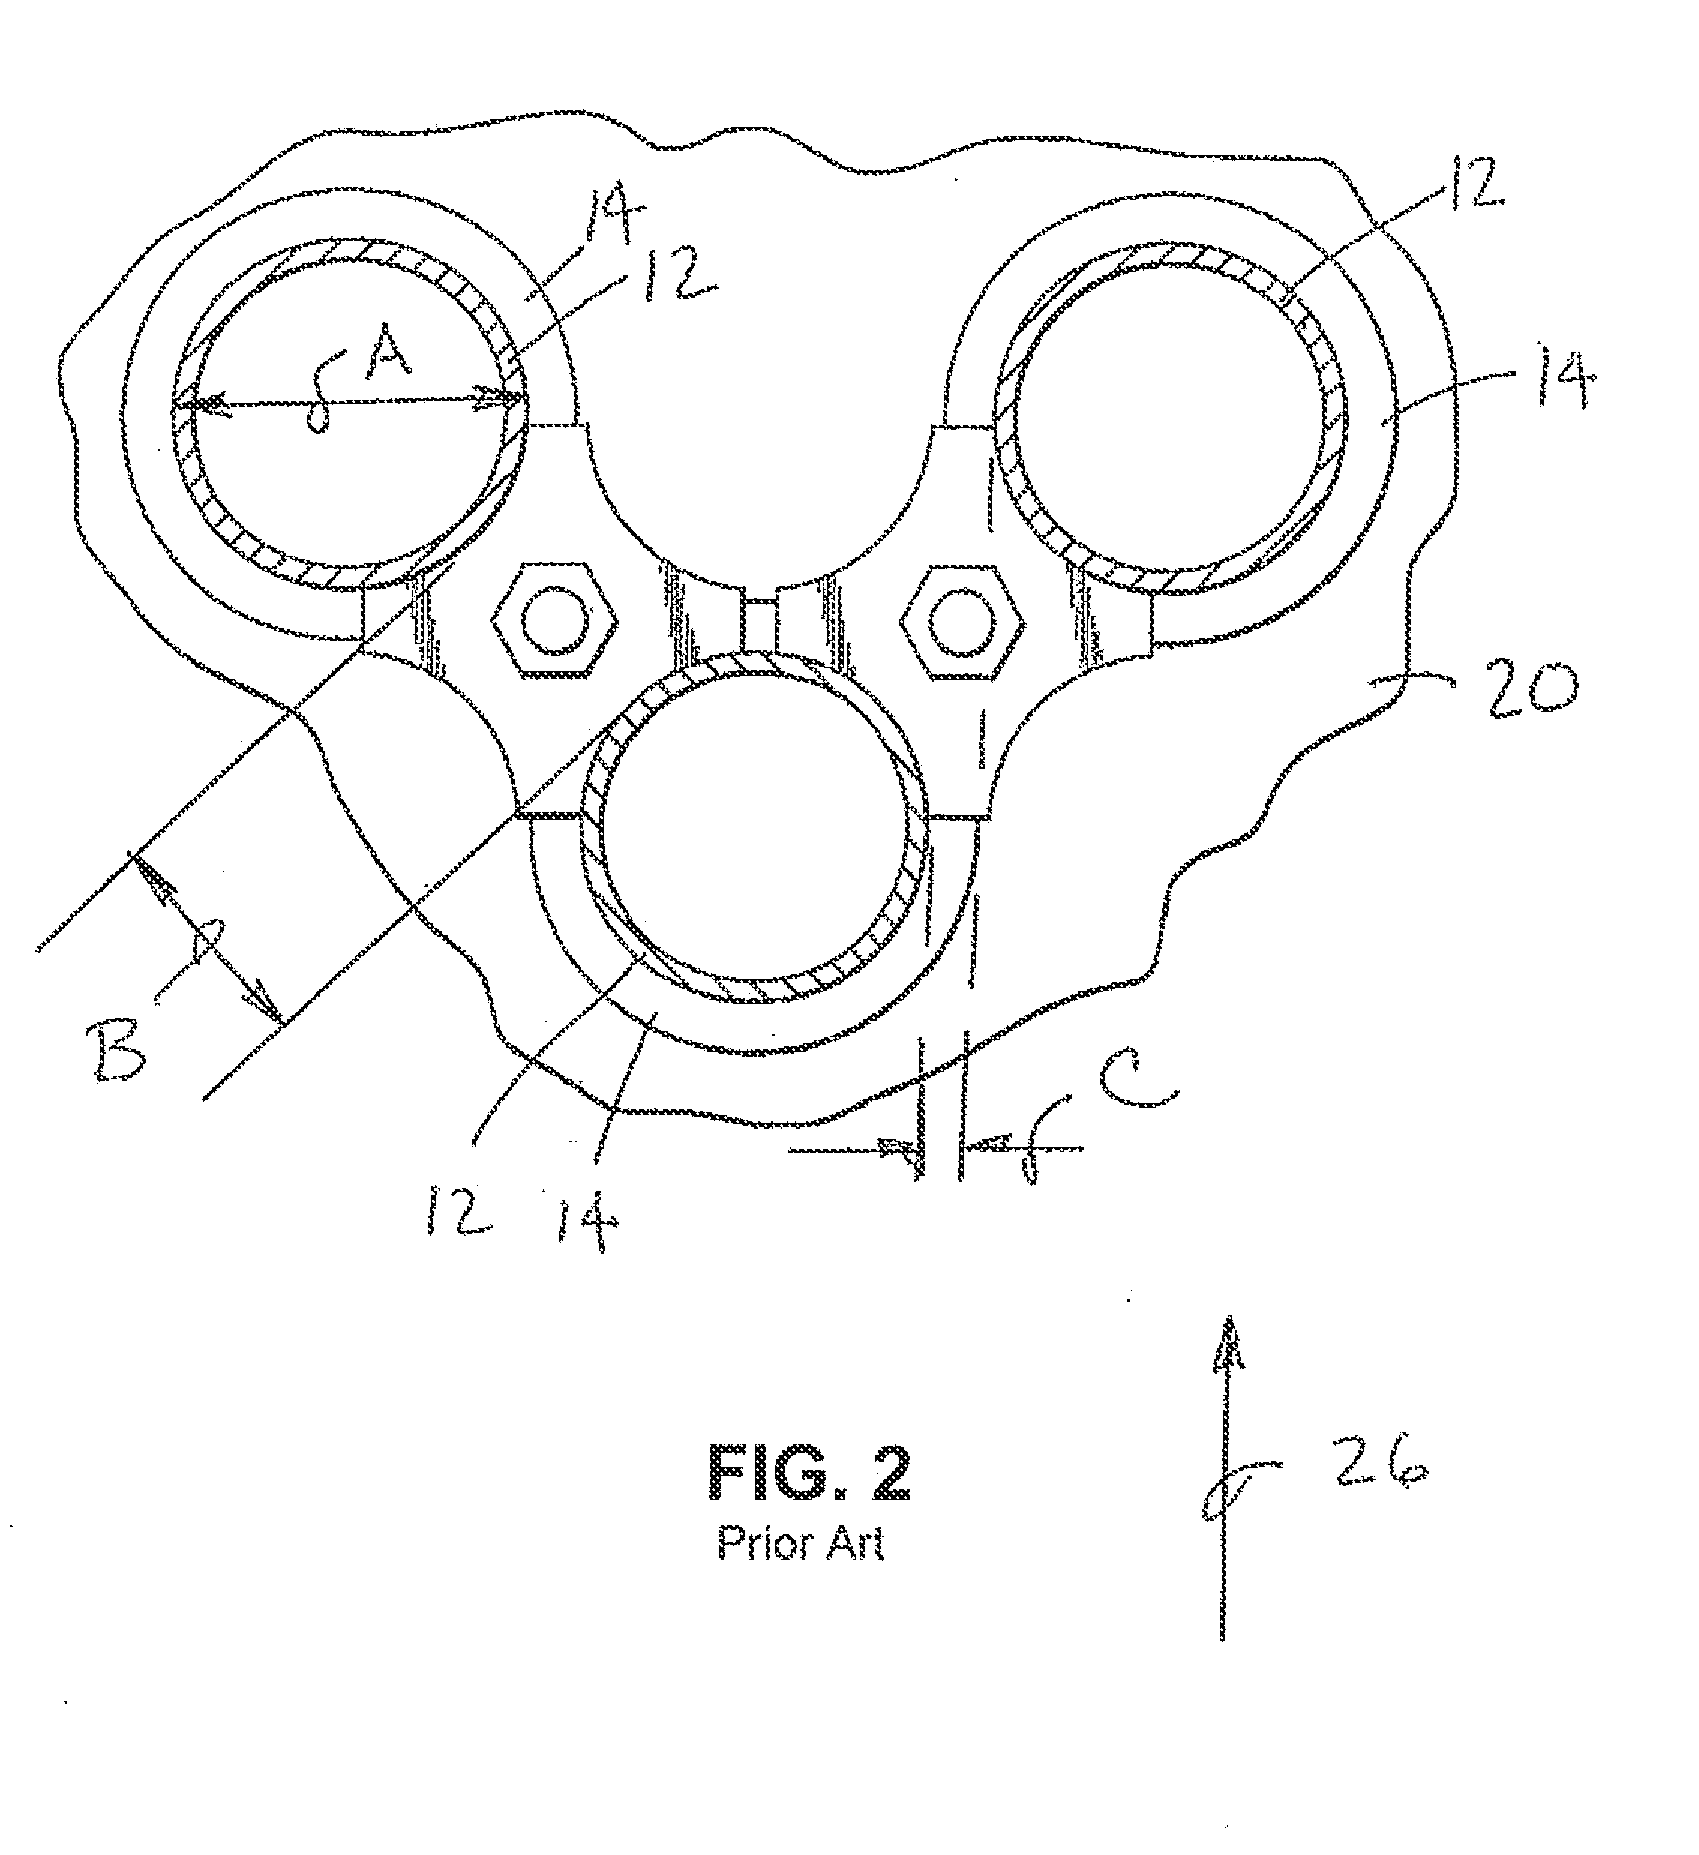 Watertube and method of making and assembling same within a boiler or heat exchanger